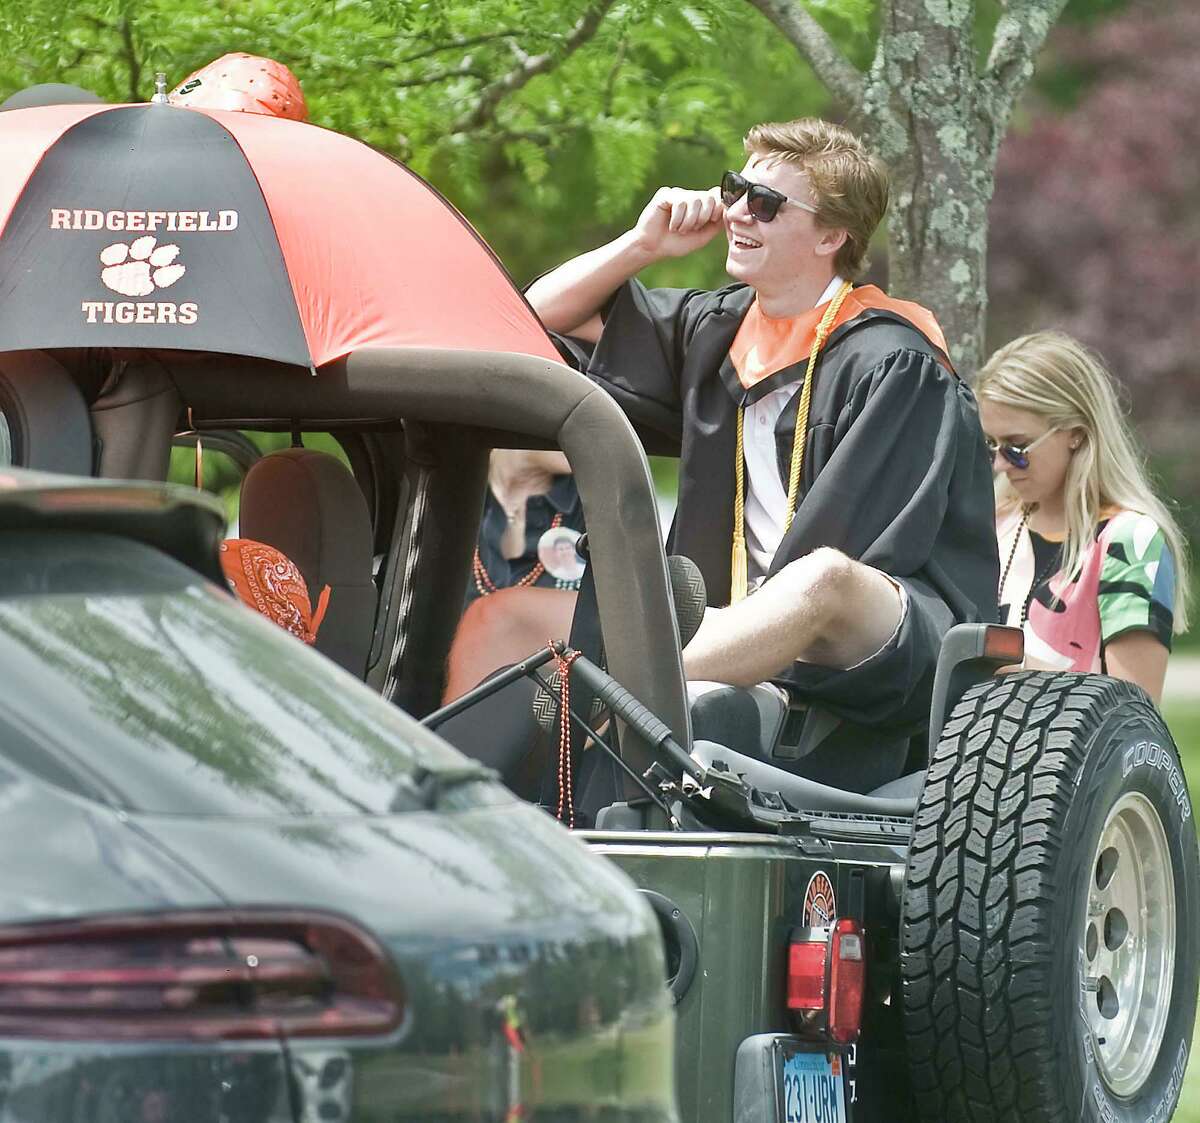 2020 Ridgefield High School graduate John Briody watches the ceremony on the big screen from his Jeep. Thursday, June 18, 2020.